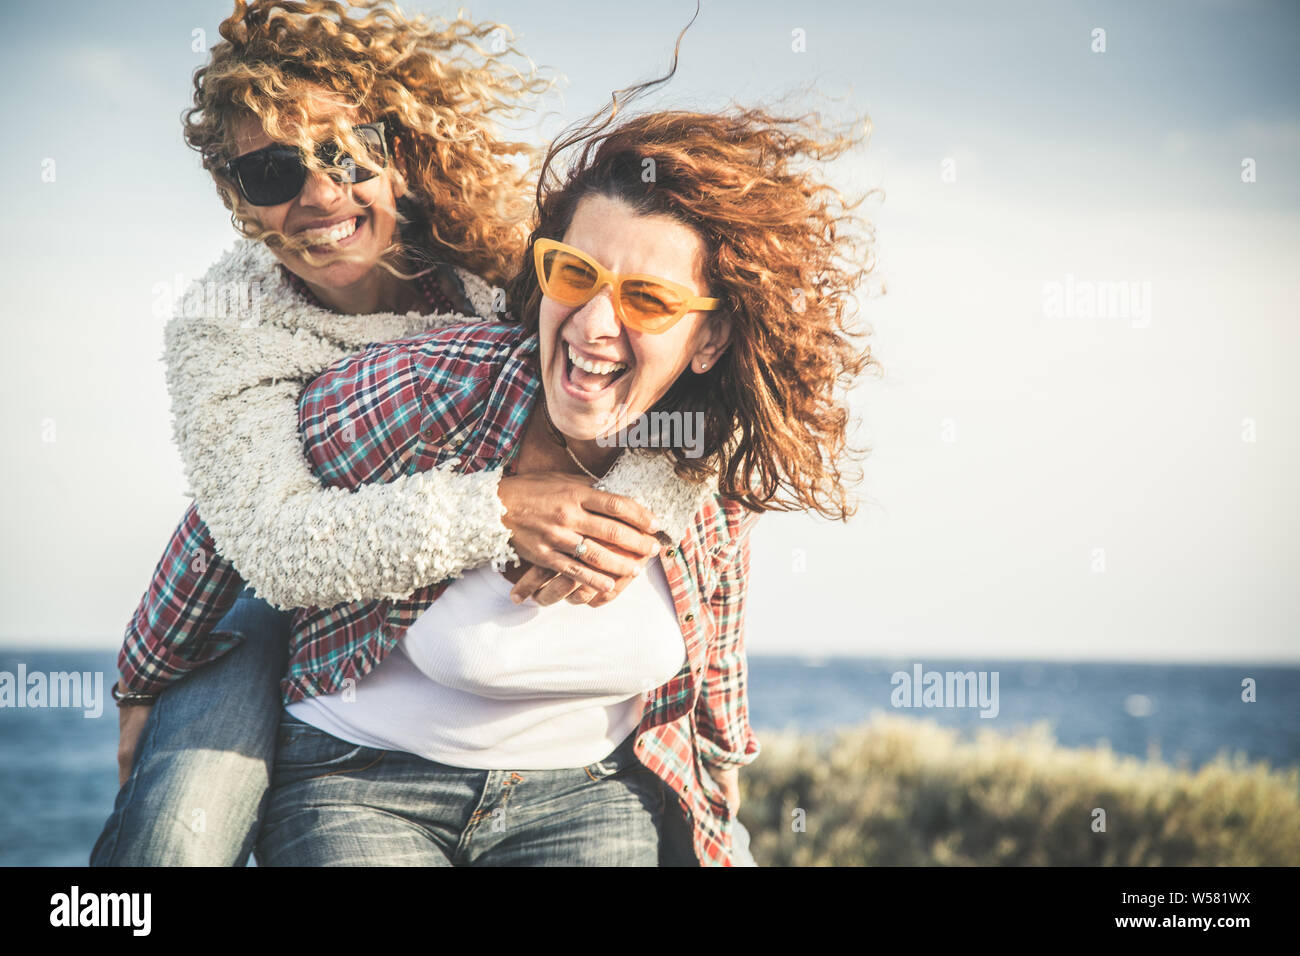 Portrait of two pretty woman enjoy free time. Smiling middle age girls giving her laughing friend piggyback while enjoying the day together at the bea Stock Photo